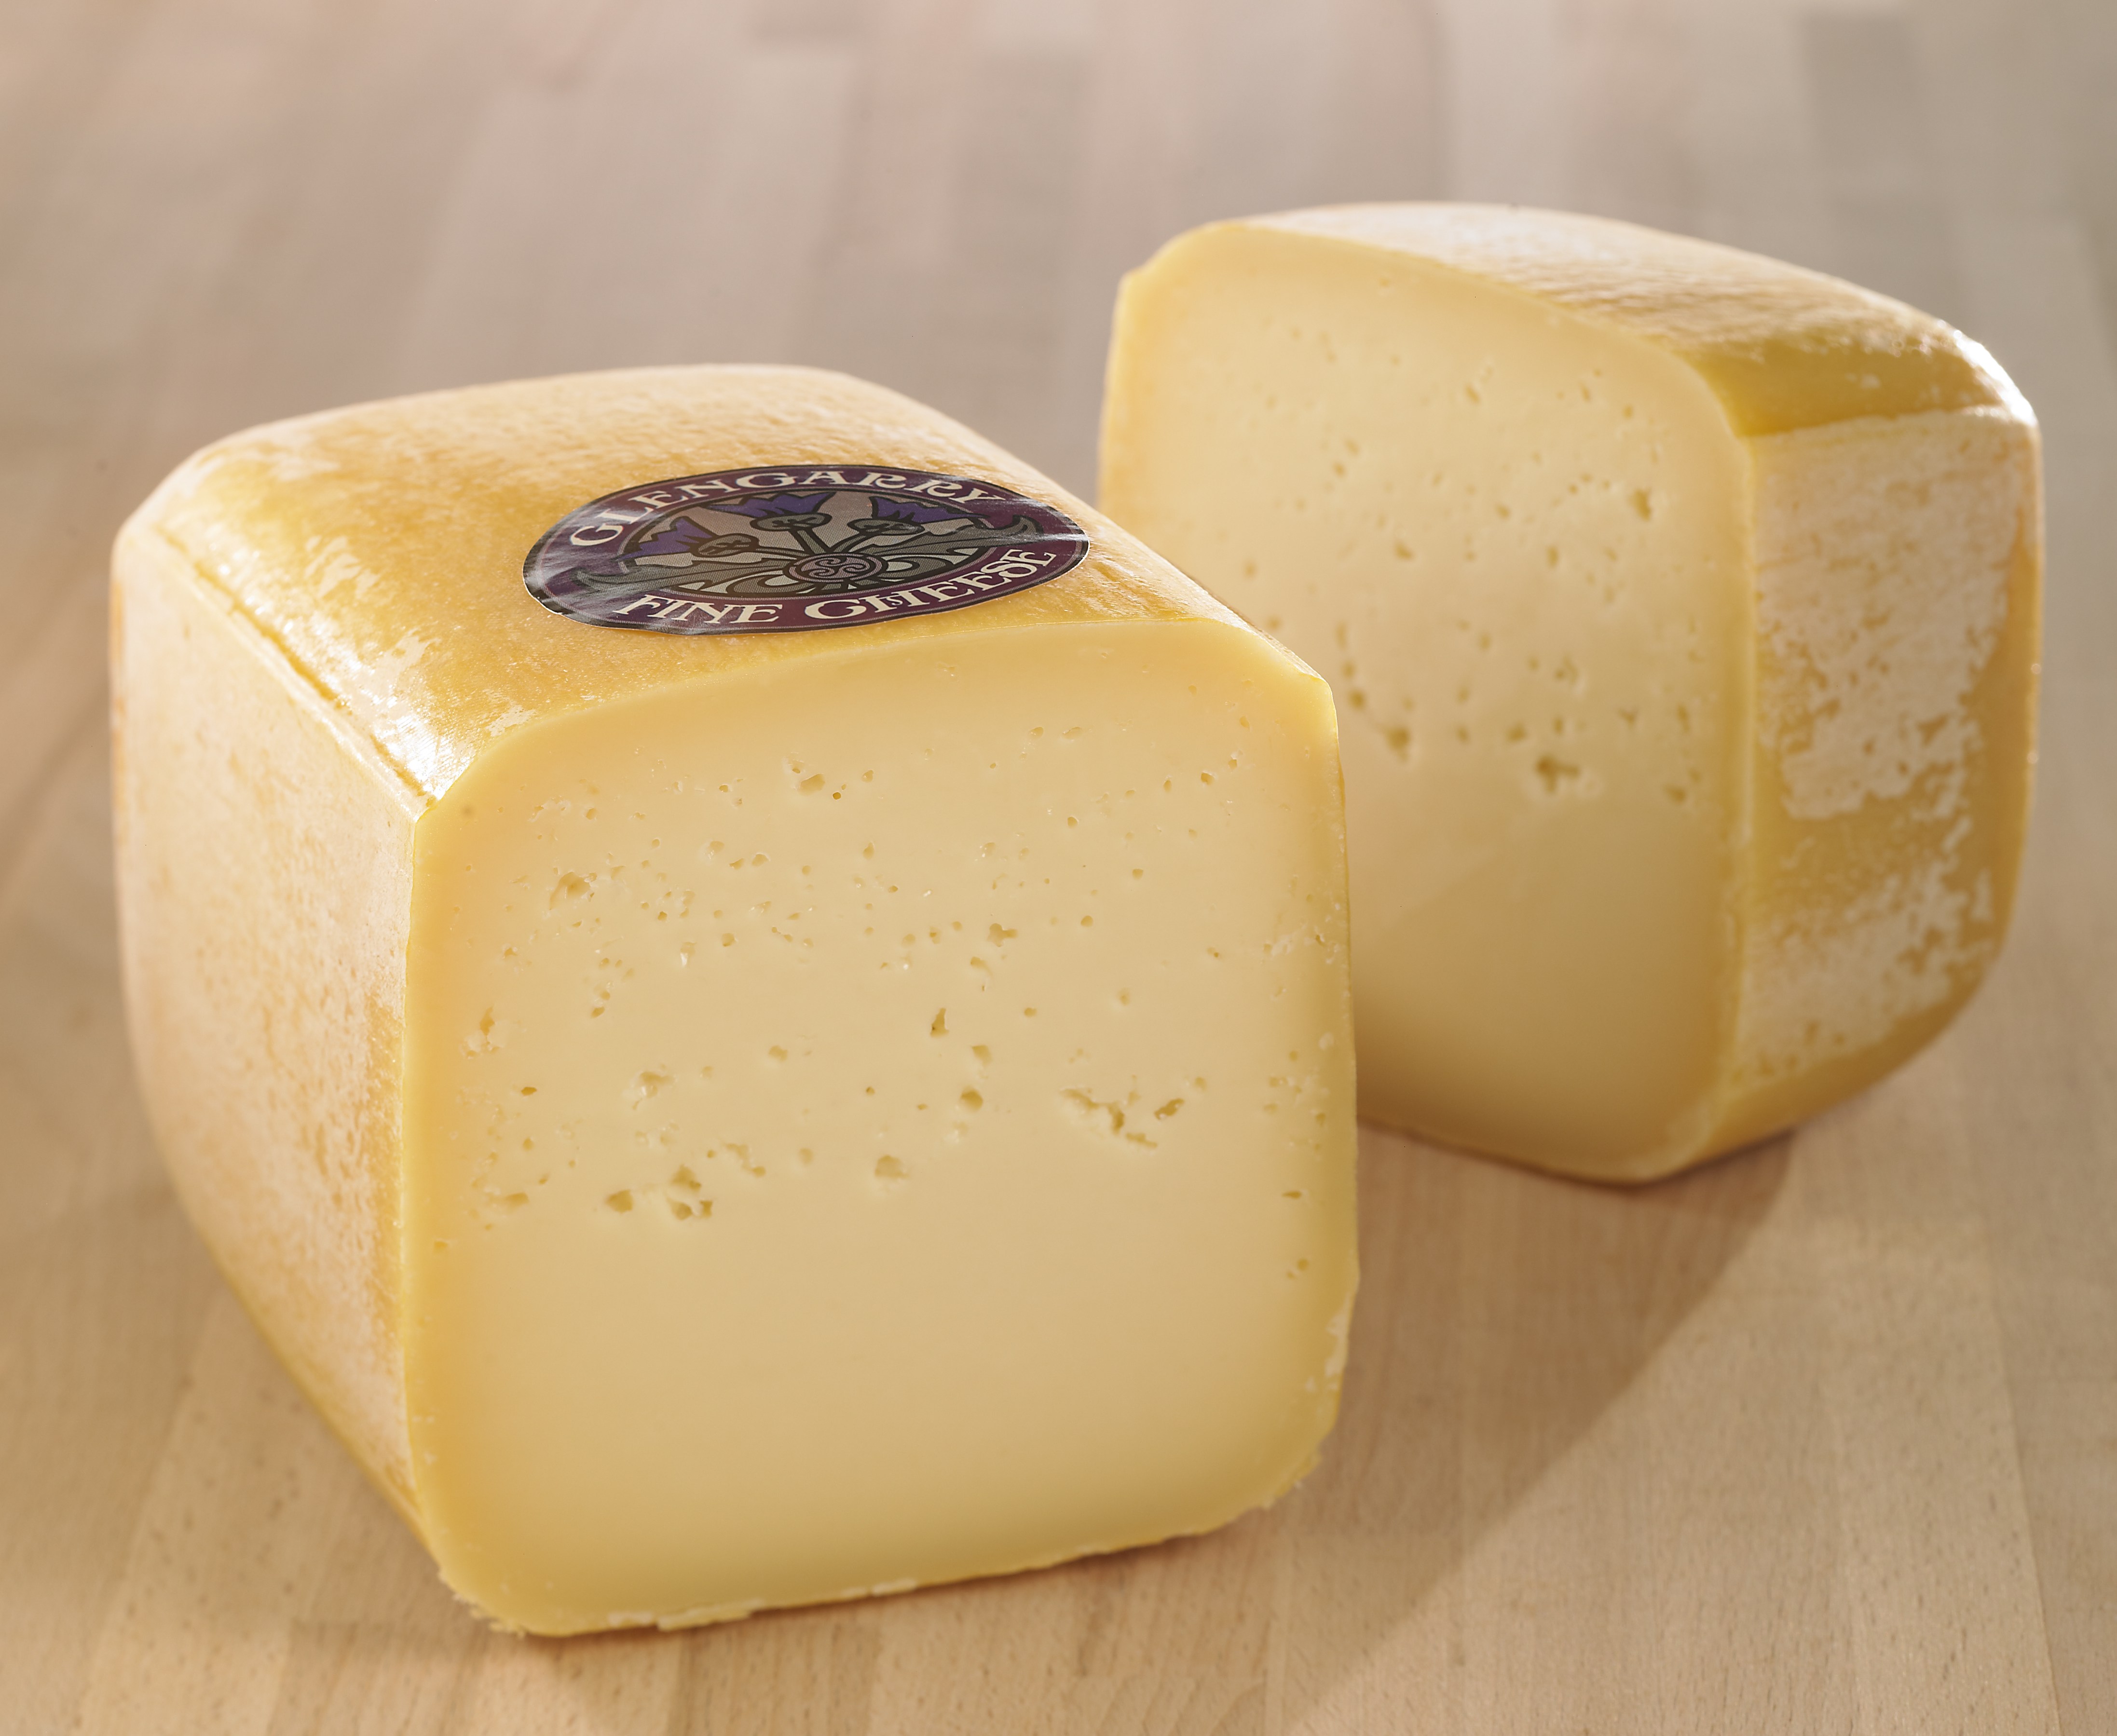 High Resolution Images of Cheese